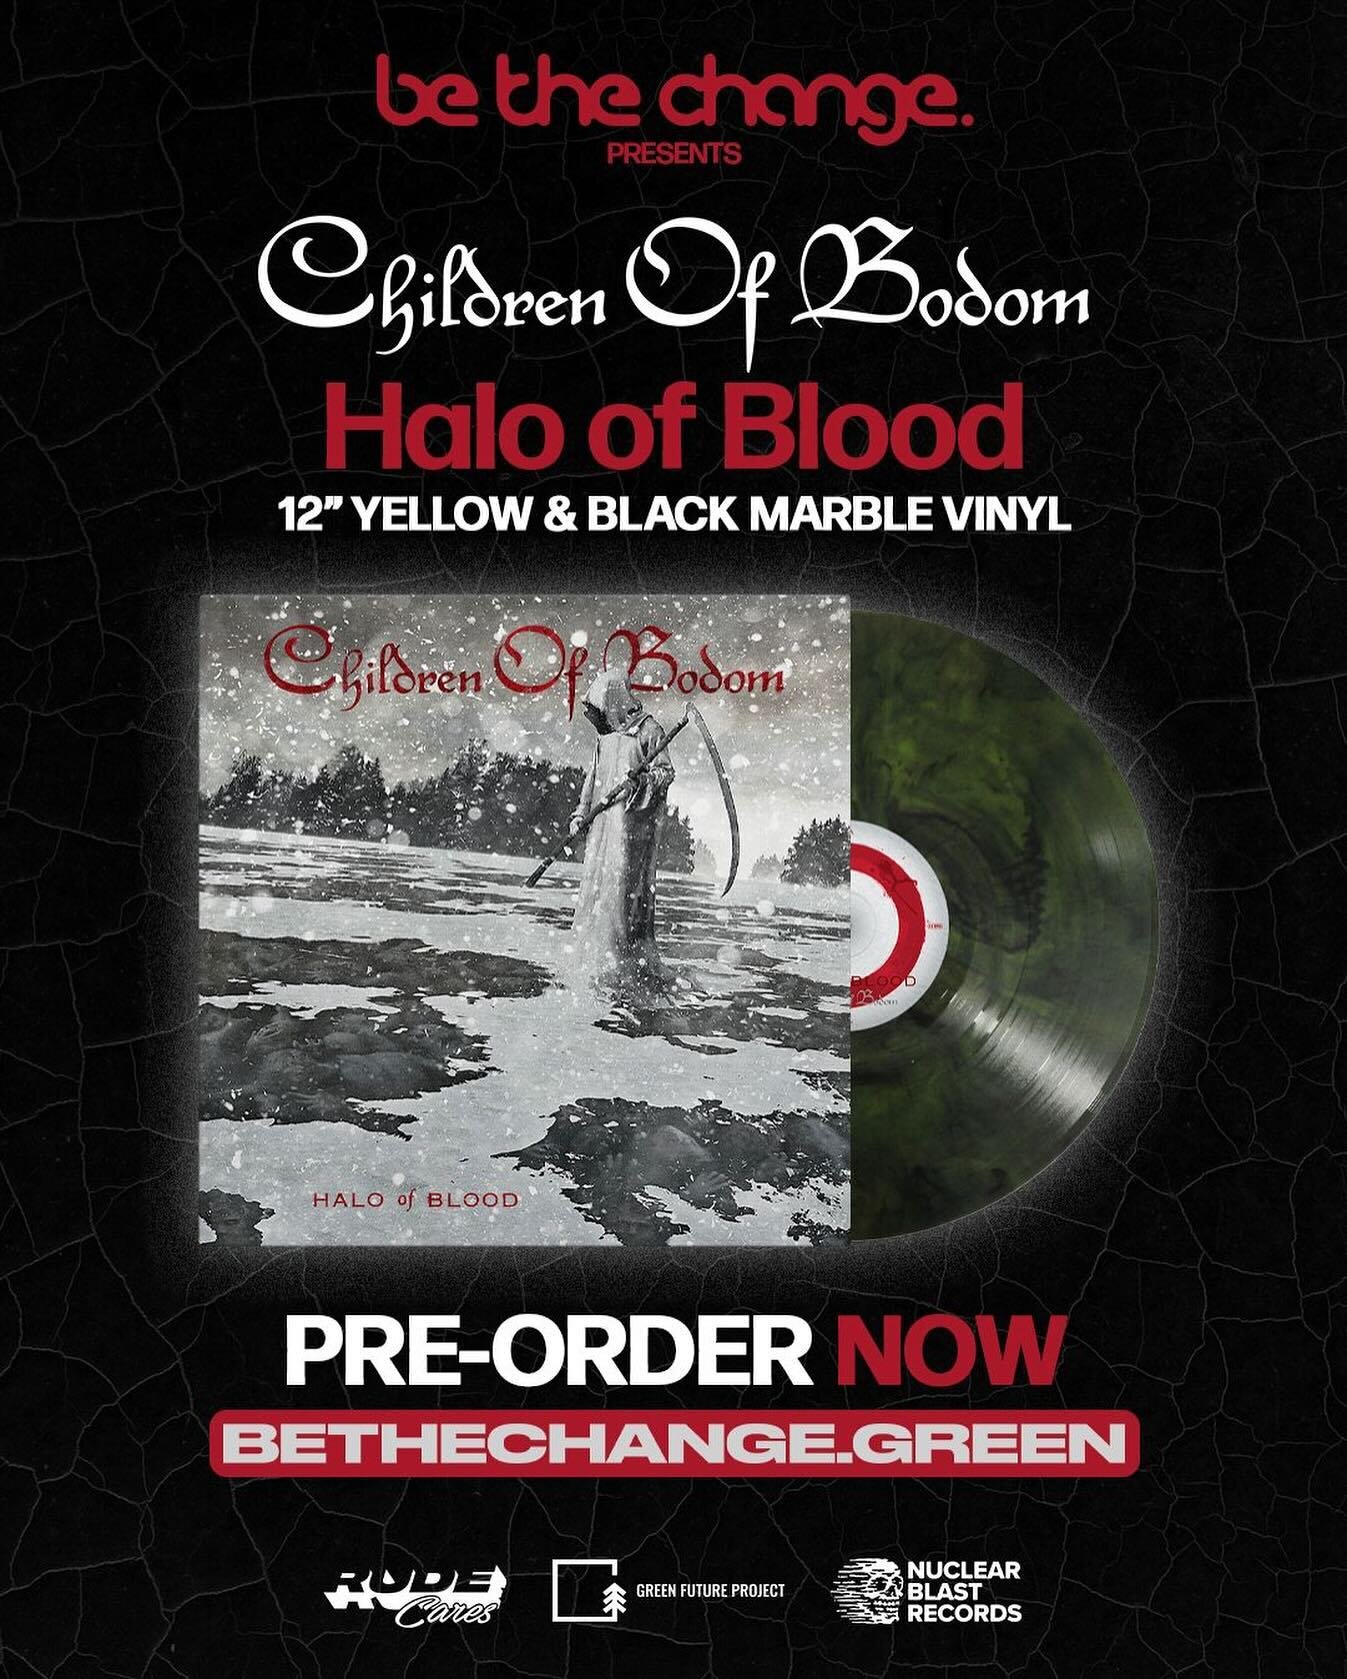 Last chance to get your hands on a very special edition of our 8th studio album Halo of Blood on Yellow &amp; Black Marble Vinyl before the pre-order ends!

The reissue is one of the first carbon-neutral vinyl releases as part of the &lsquo;Be The Ch